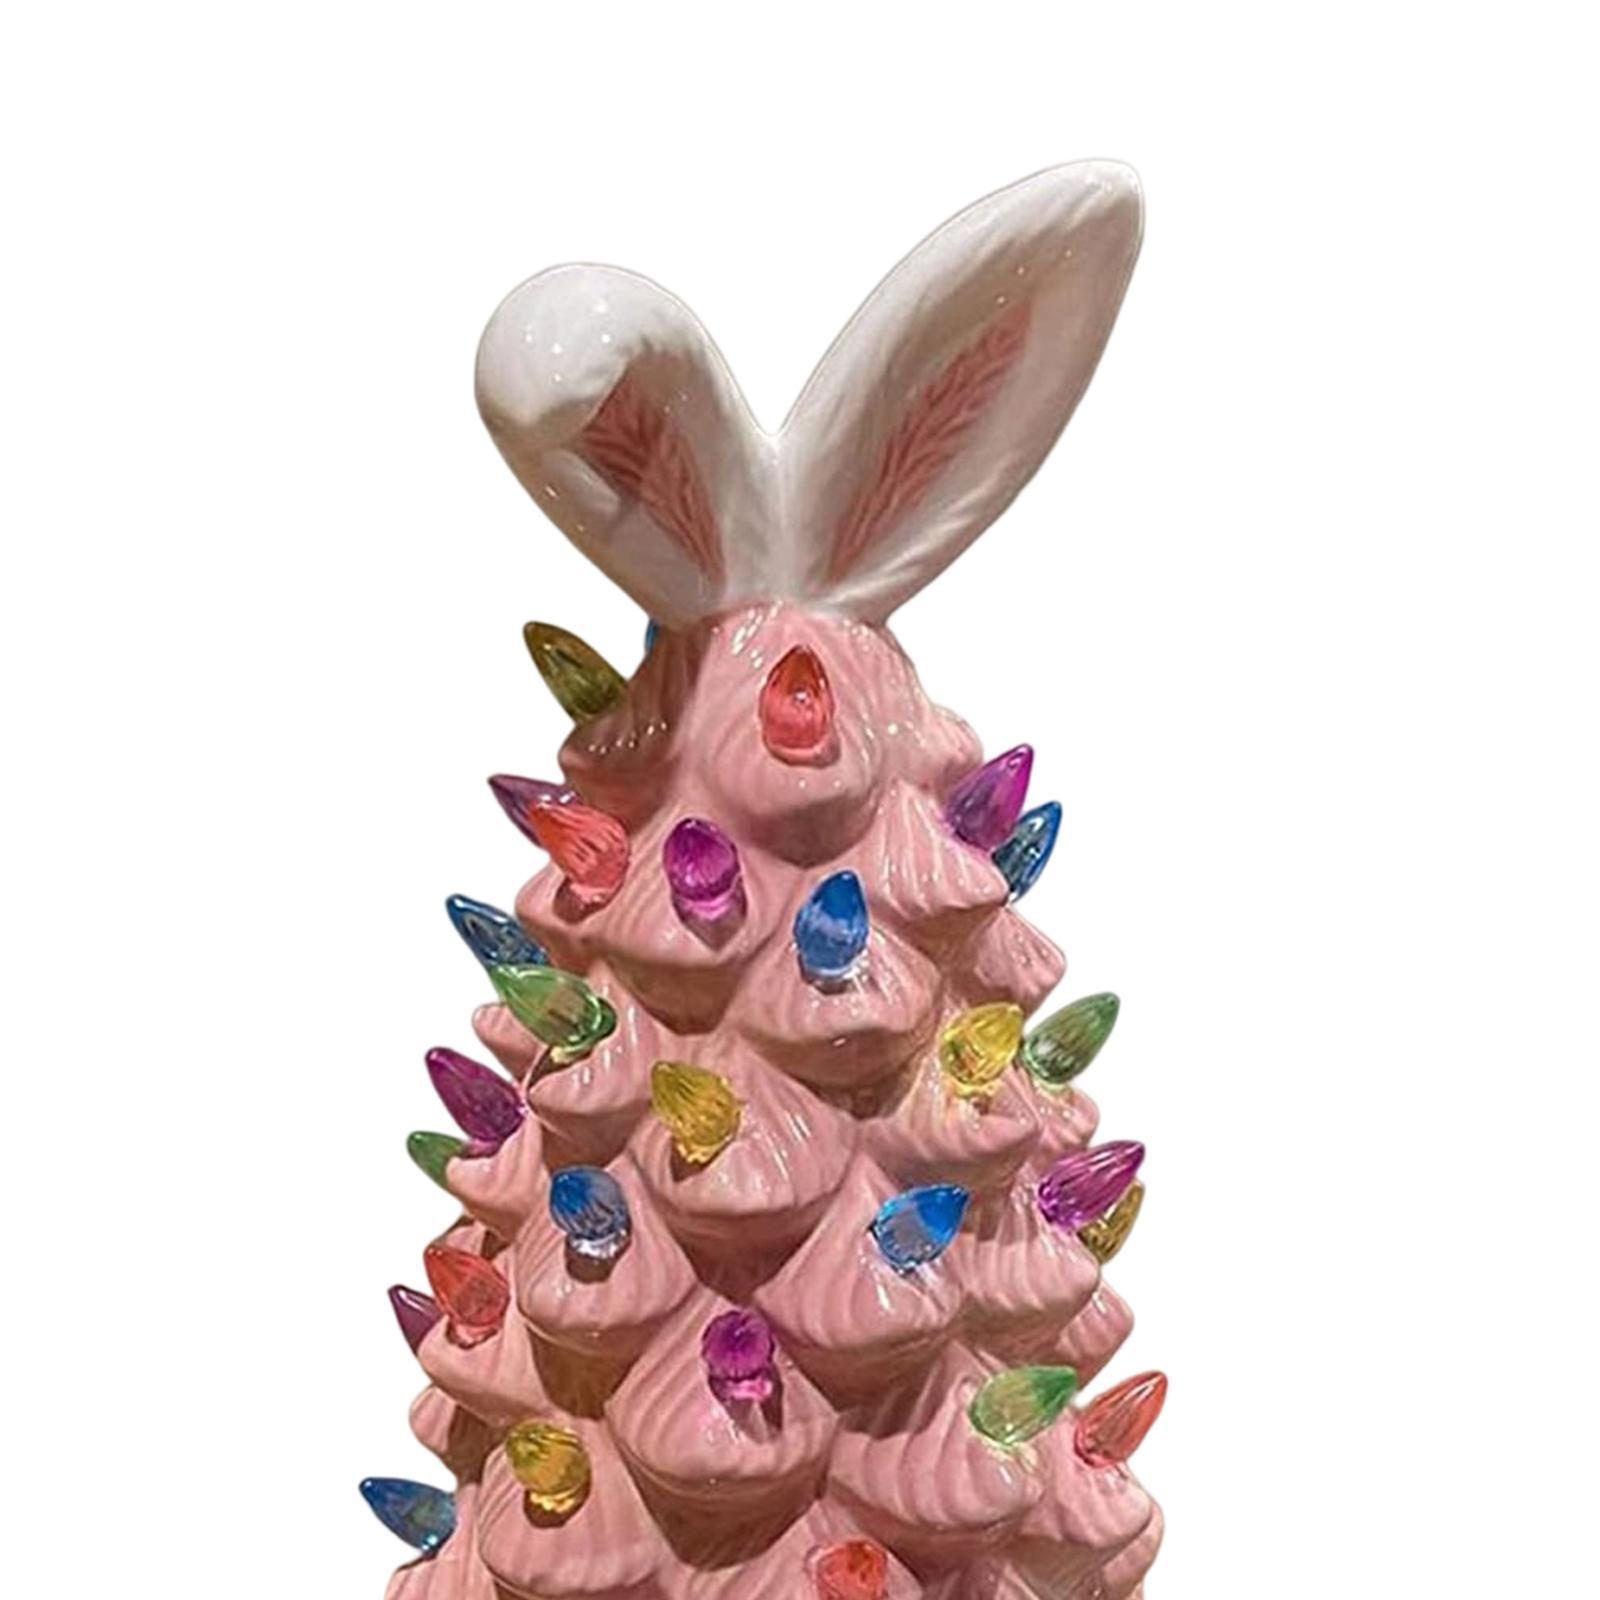 Easter Bunny Statue Ornaments Animal Figures for Home Shelf Decoration